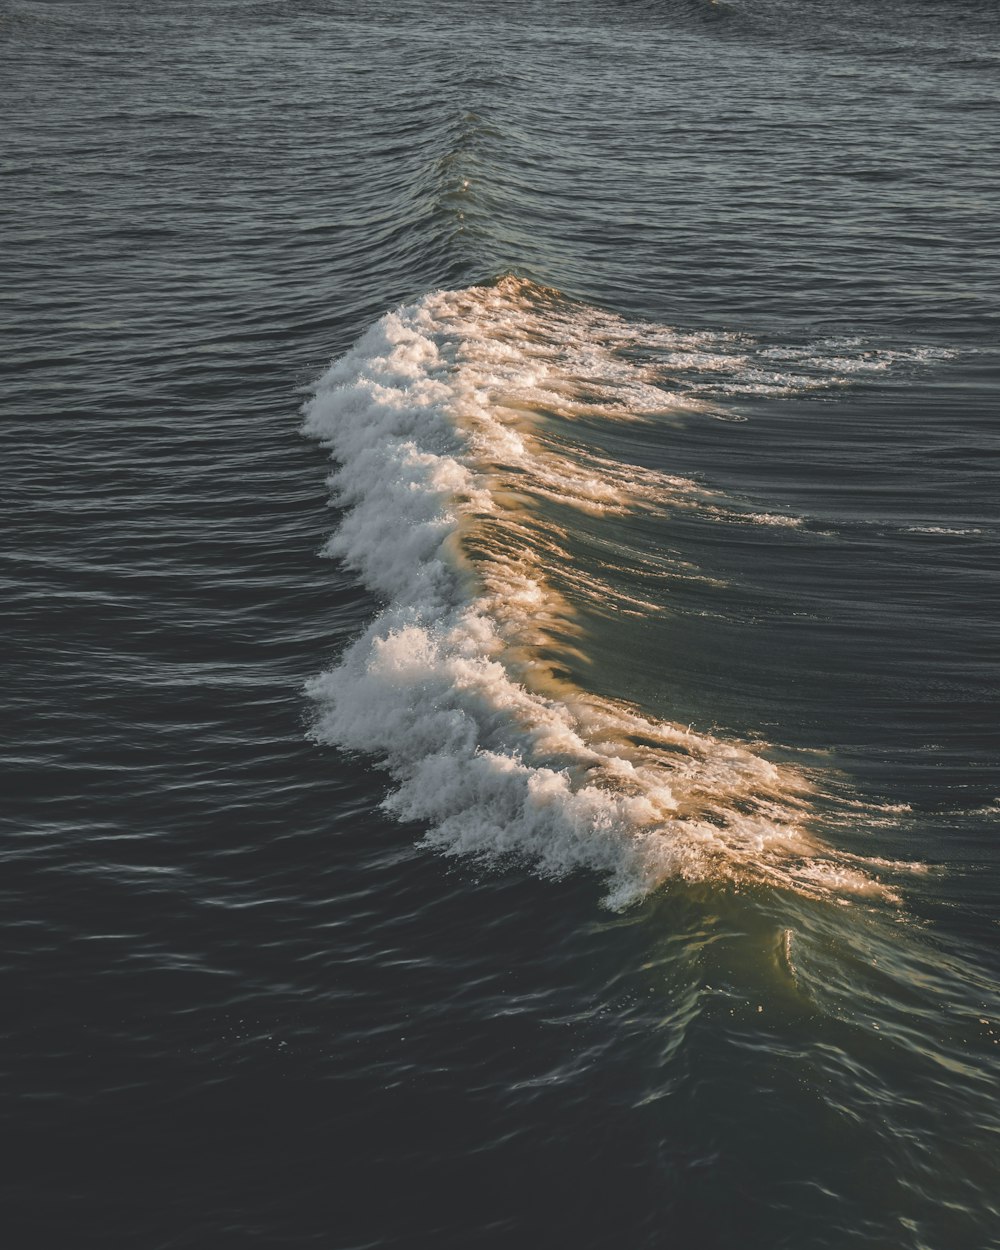 the wake of a boat in the water